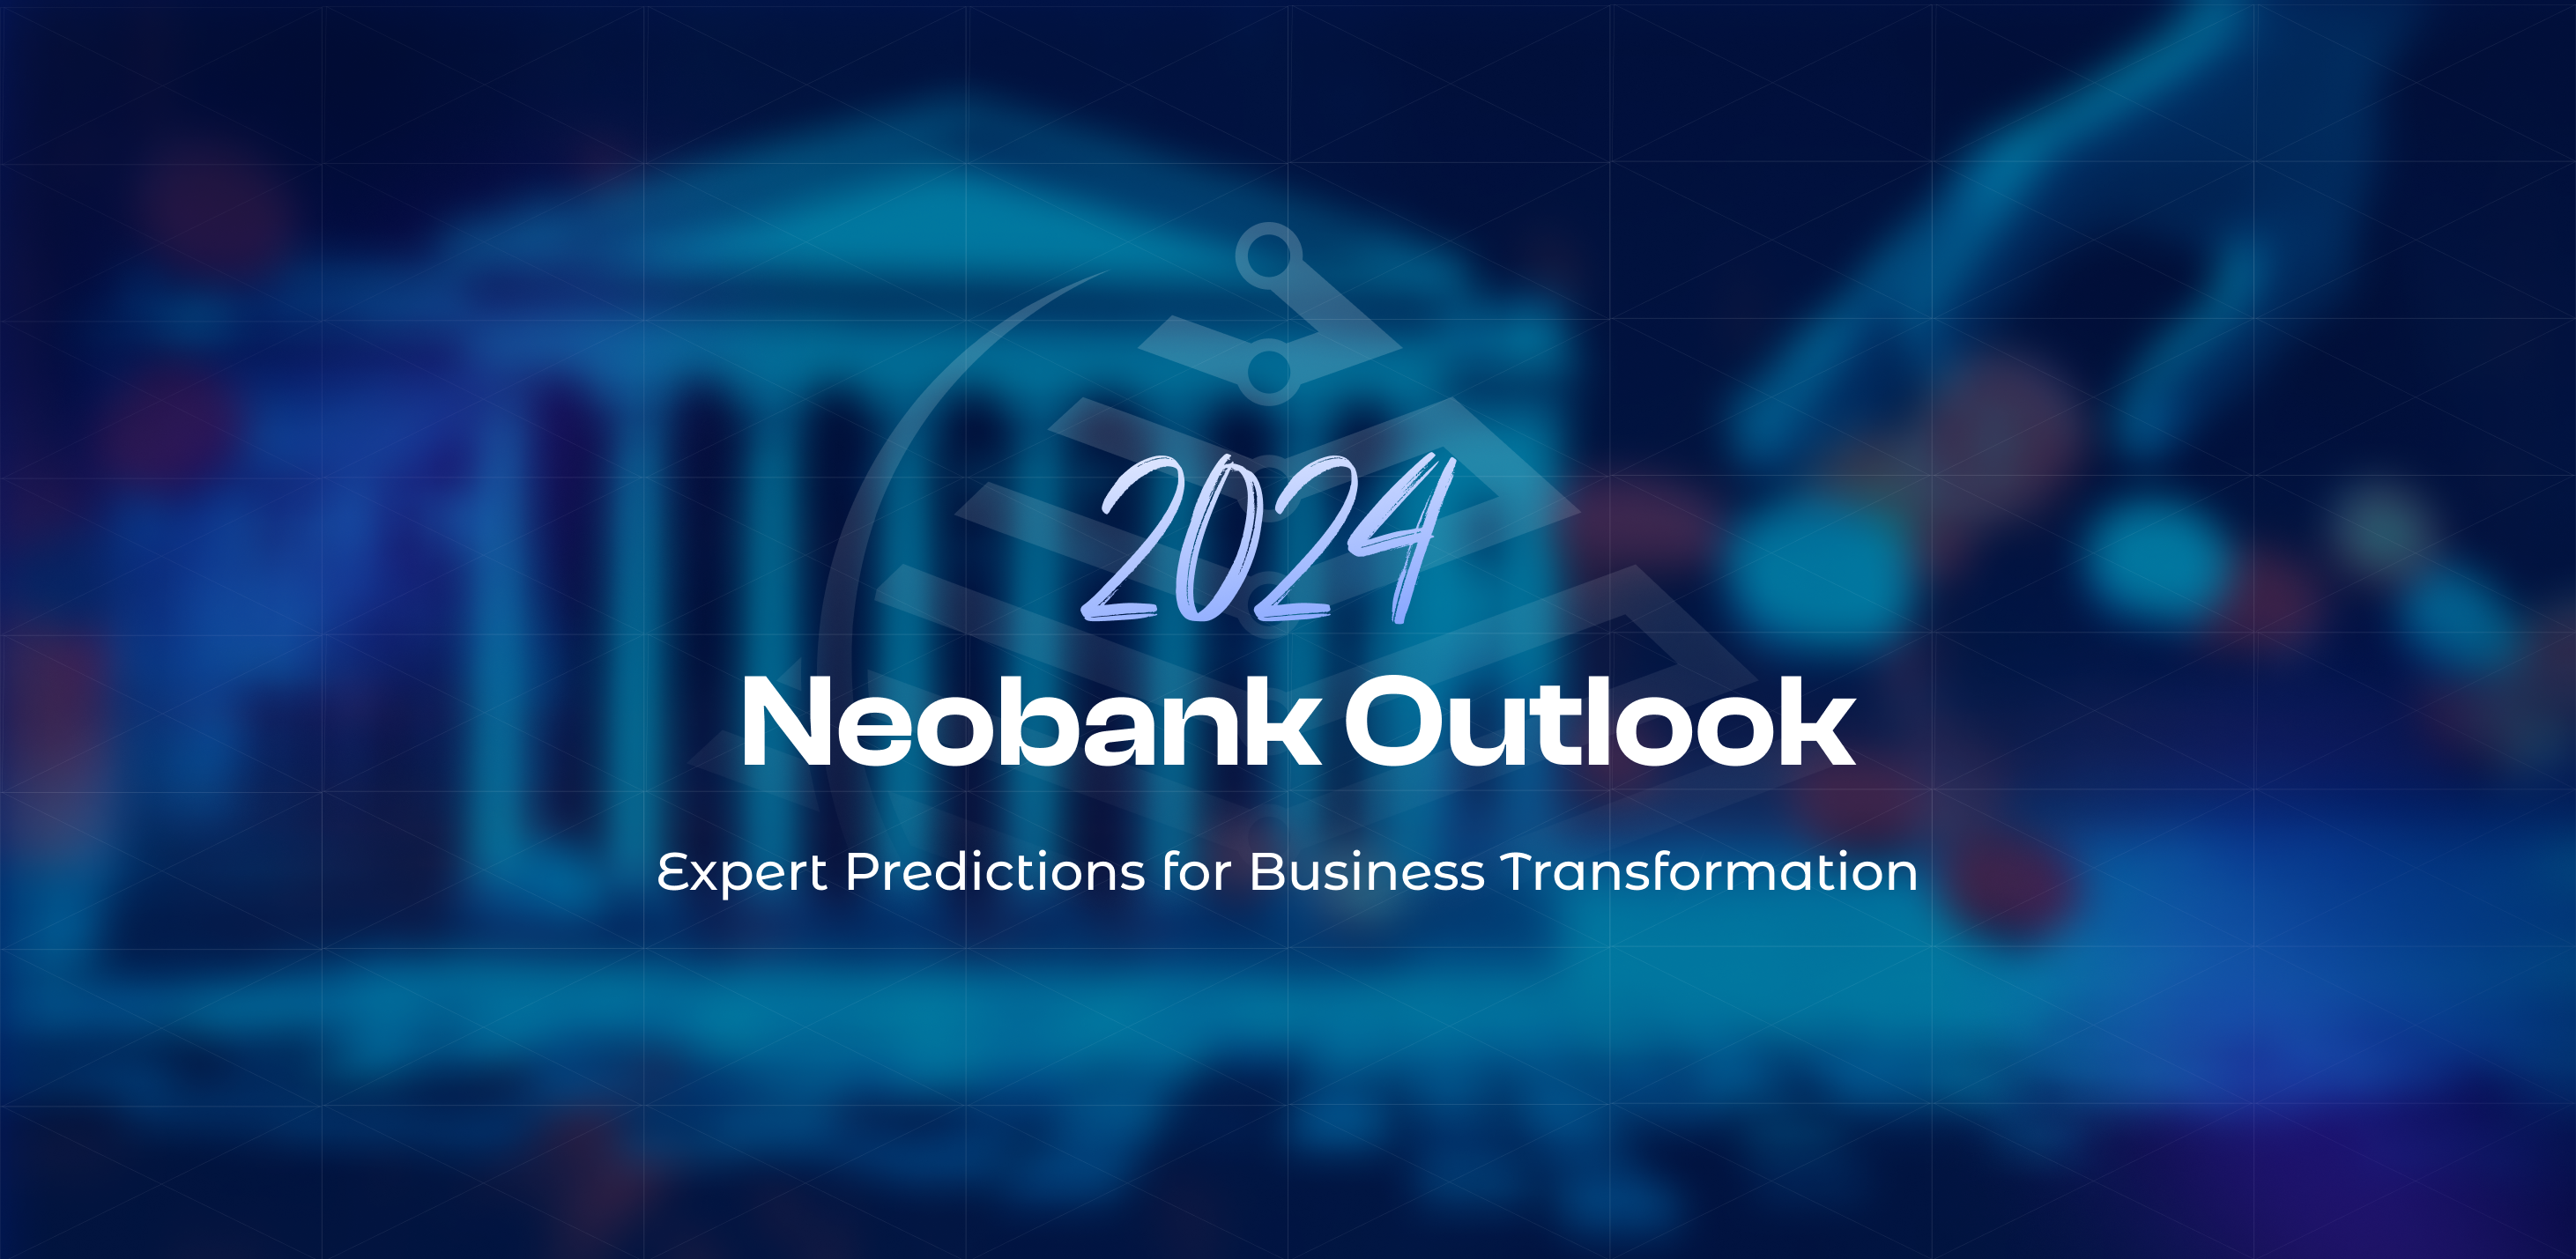 2024 Neobank Outlook: Expert Predictions for Business Transformation